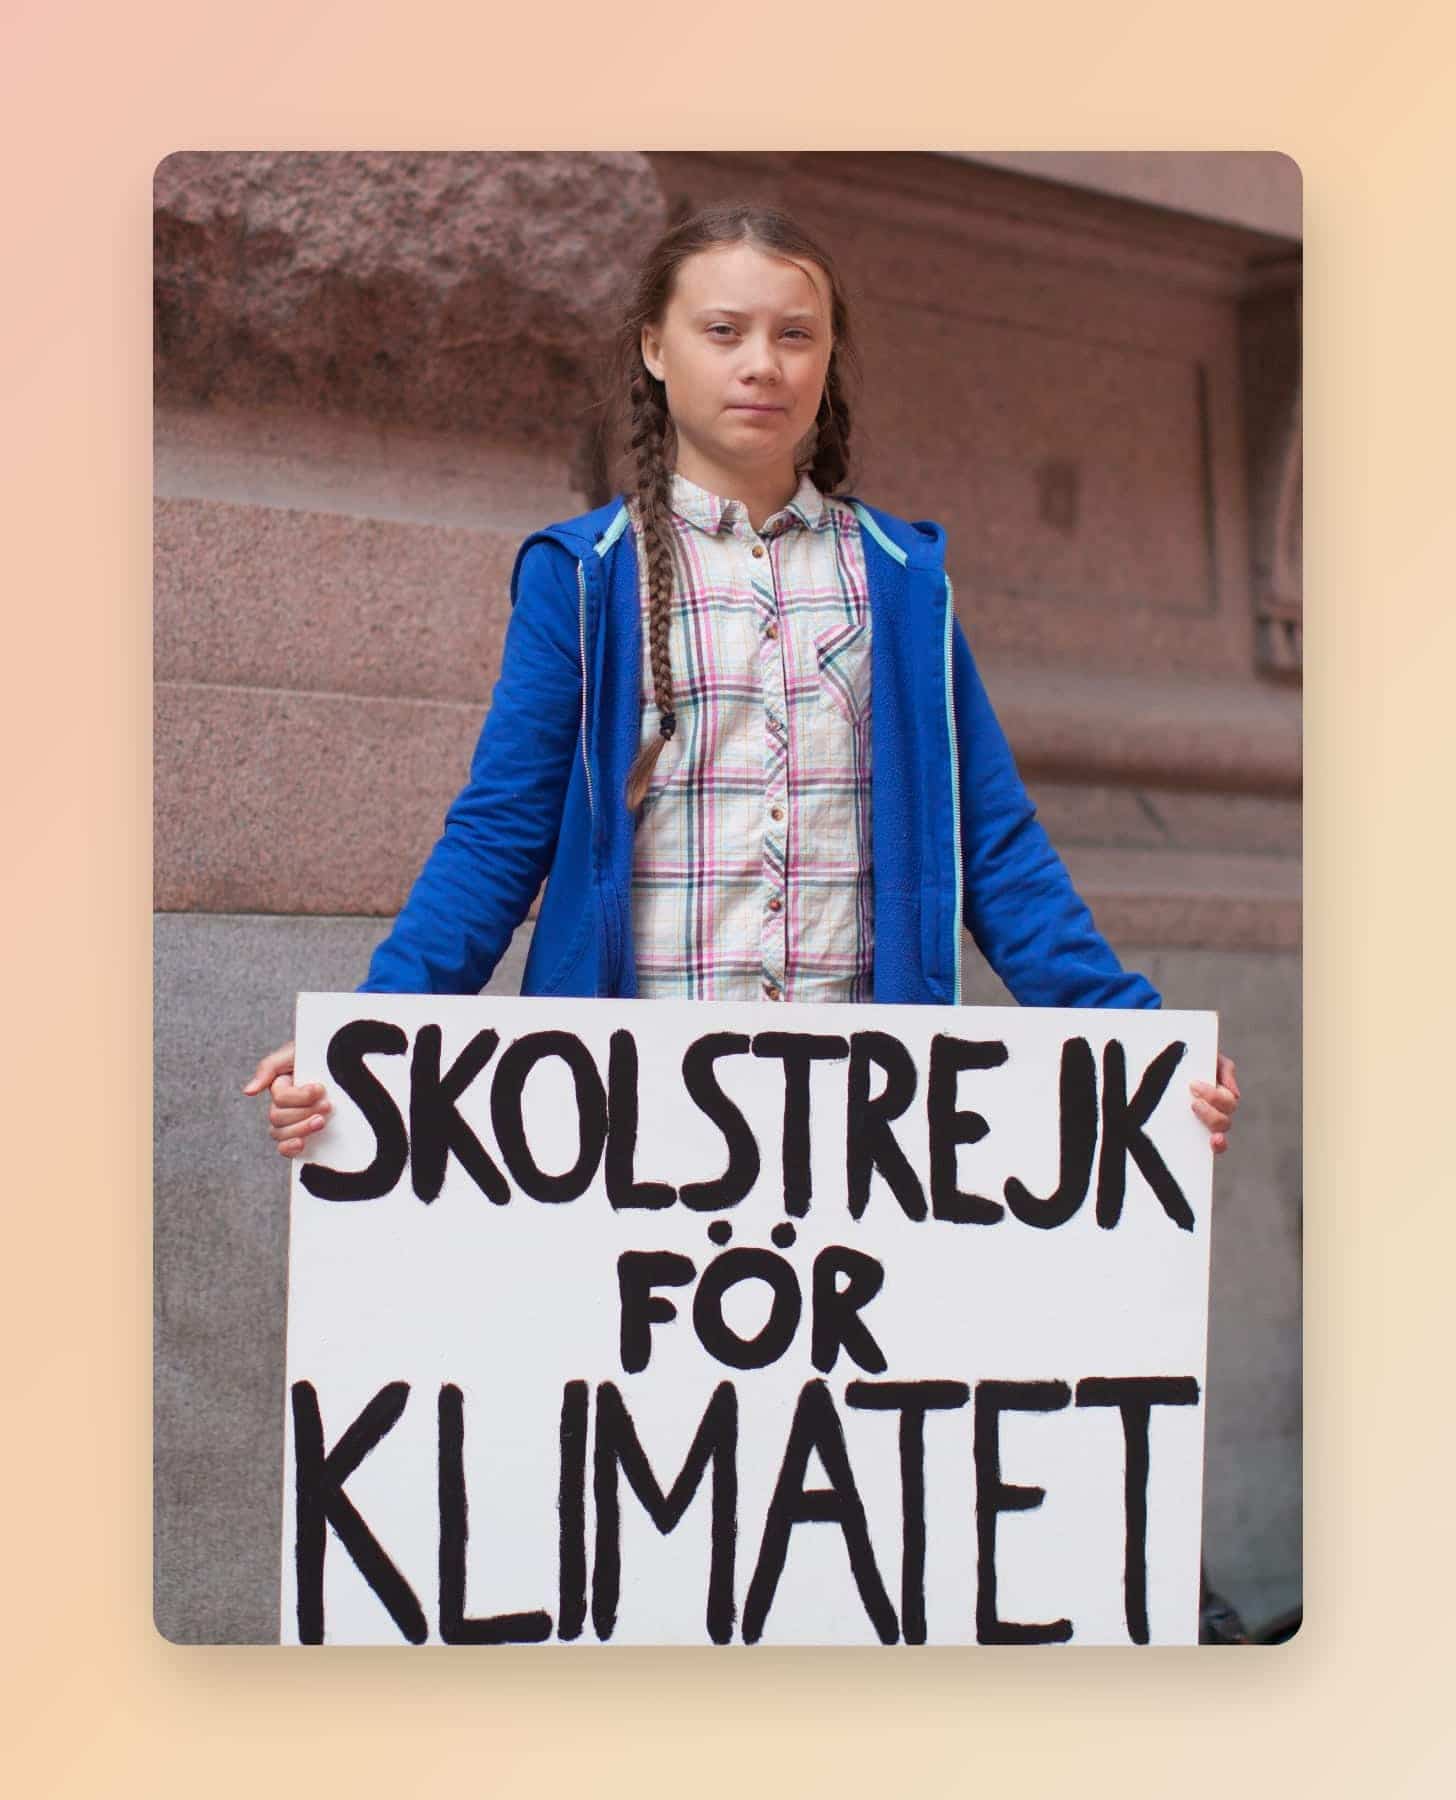 In August 2018, outside the Swedish parliament building, Greta Thunberg started a school strike for the climate. Her sign reads, “Skolstrejk för klimatet,” 